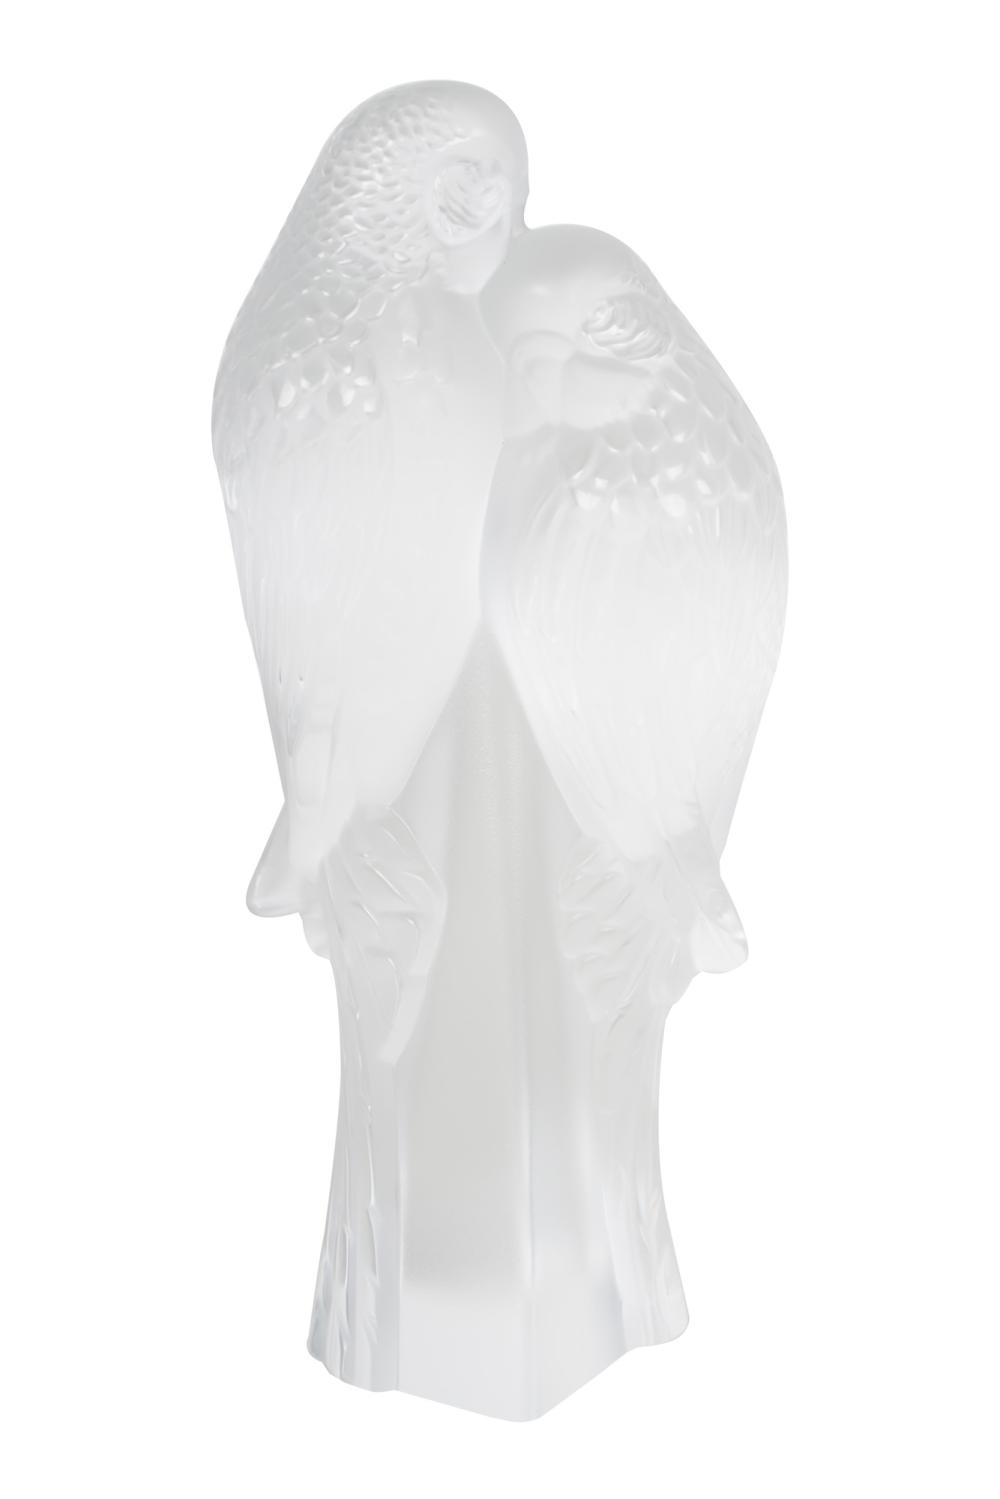 LALIQUE PARAKEET GROUP7 1/2 inches high